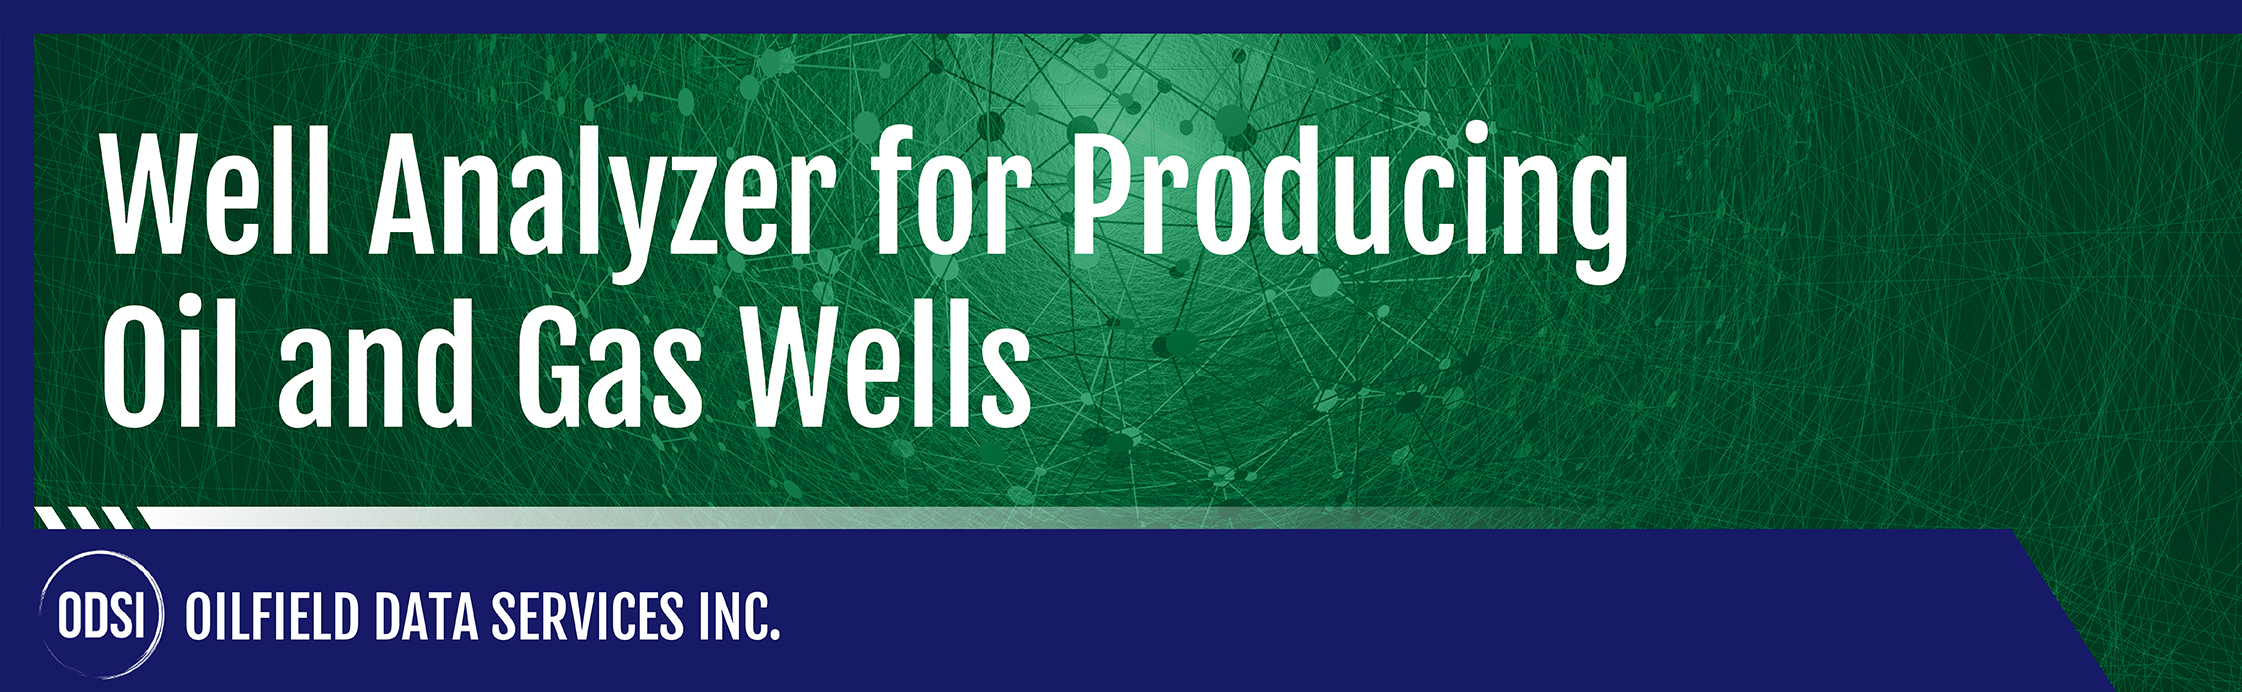 Well Analyzer for Producing Oil and Gas Wells